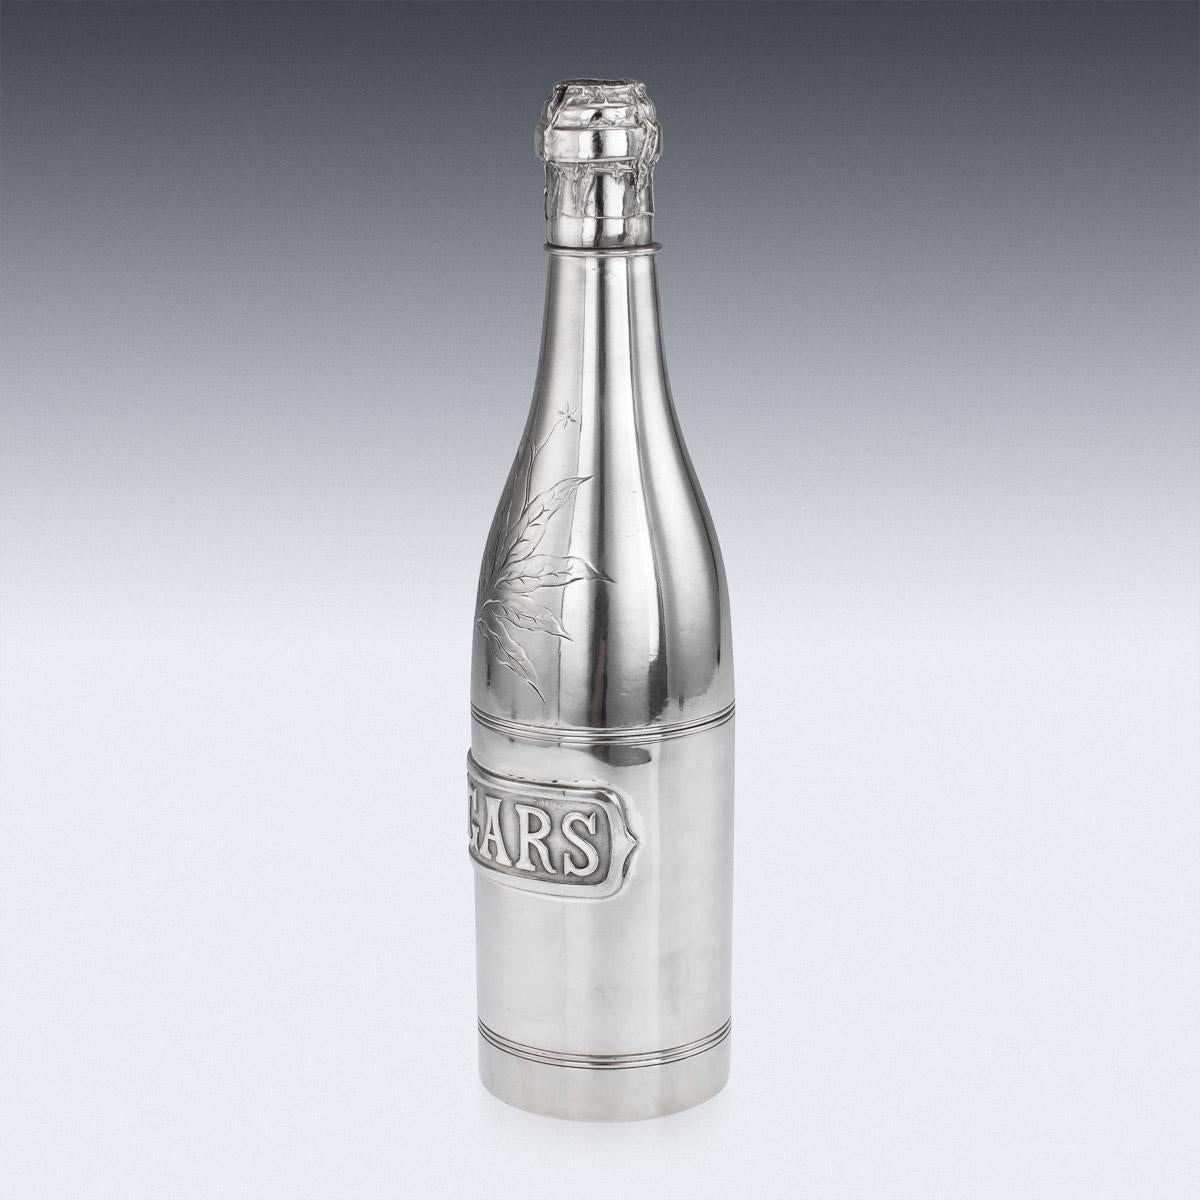 Antique early-20th century novelty silver plated champagne bottle shaped cigar holder, decorated with a tobacco leaf and a cigars sign, the bottle is made up of various screwed on compartments for cigars, tobacco and matches. Stamped on the base by